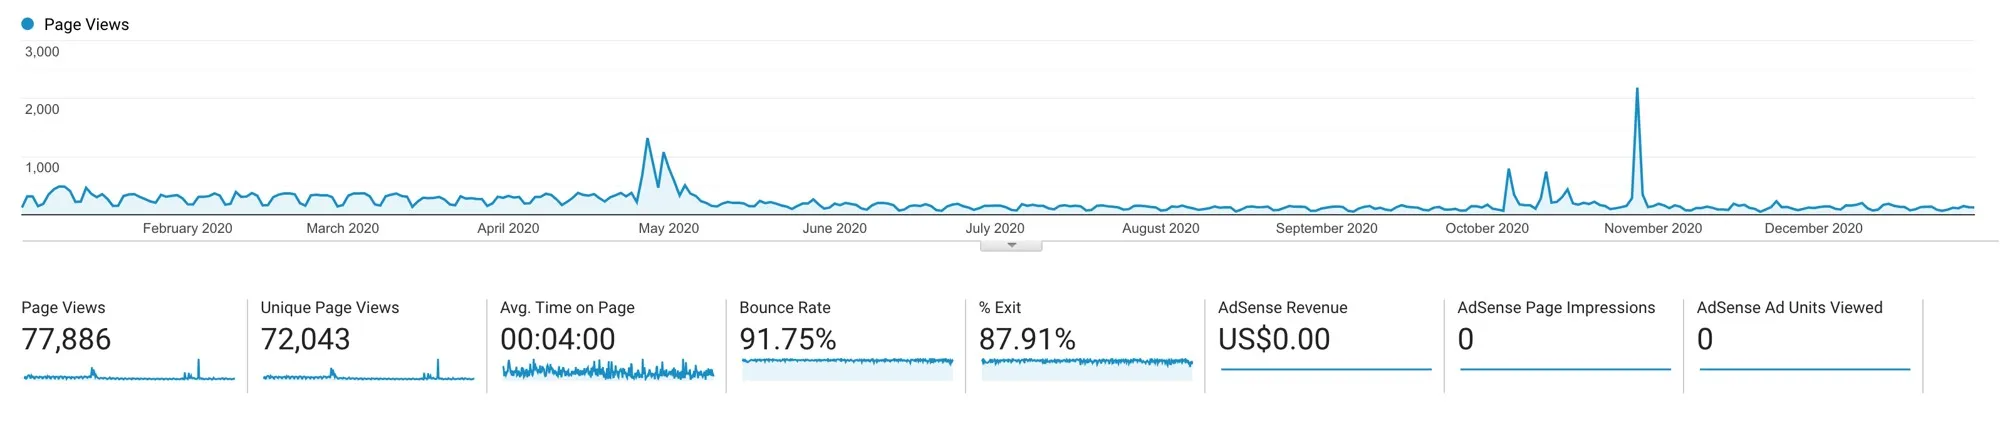 Pageviews and other stats for loige.co in 2020